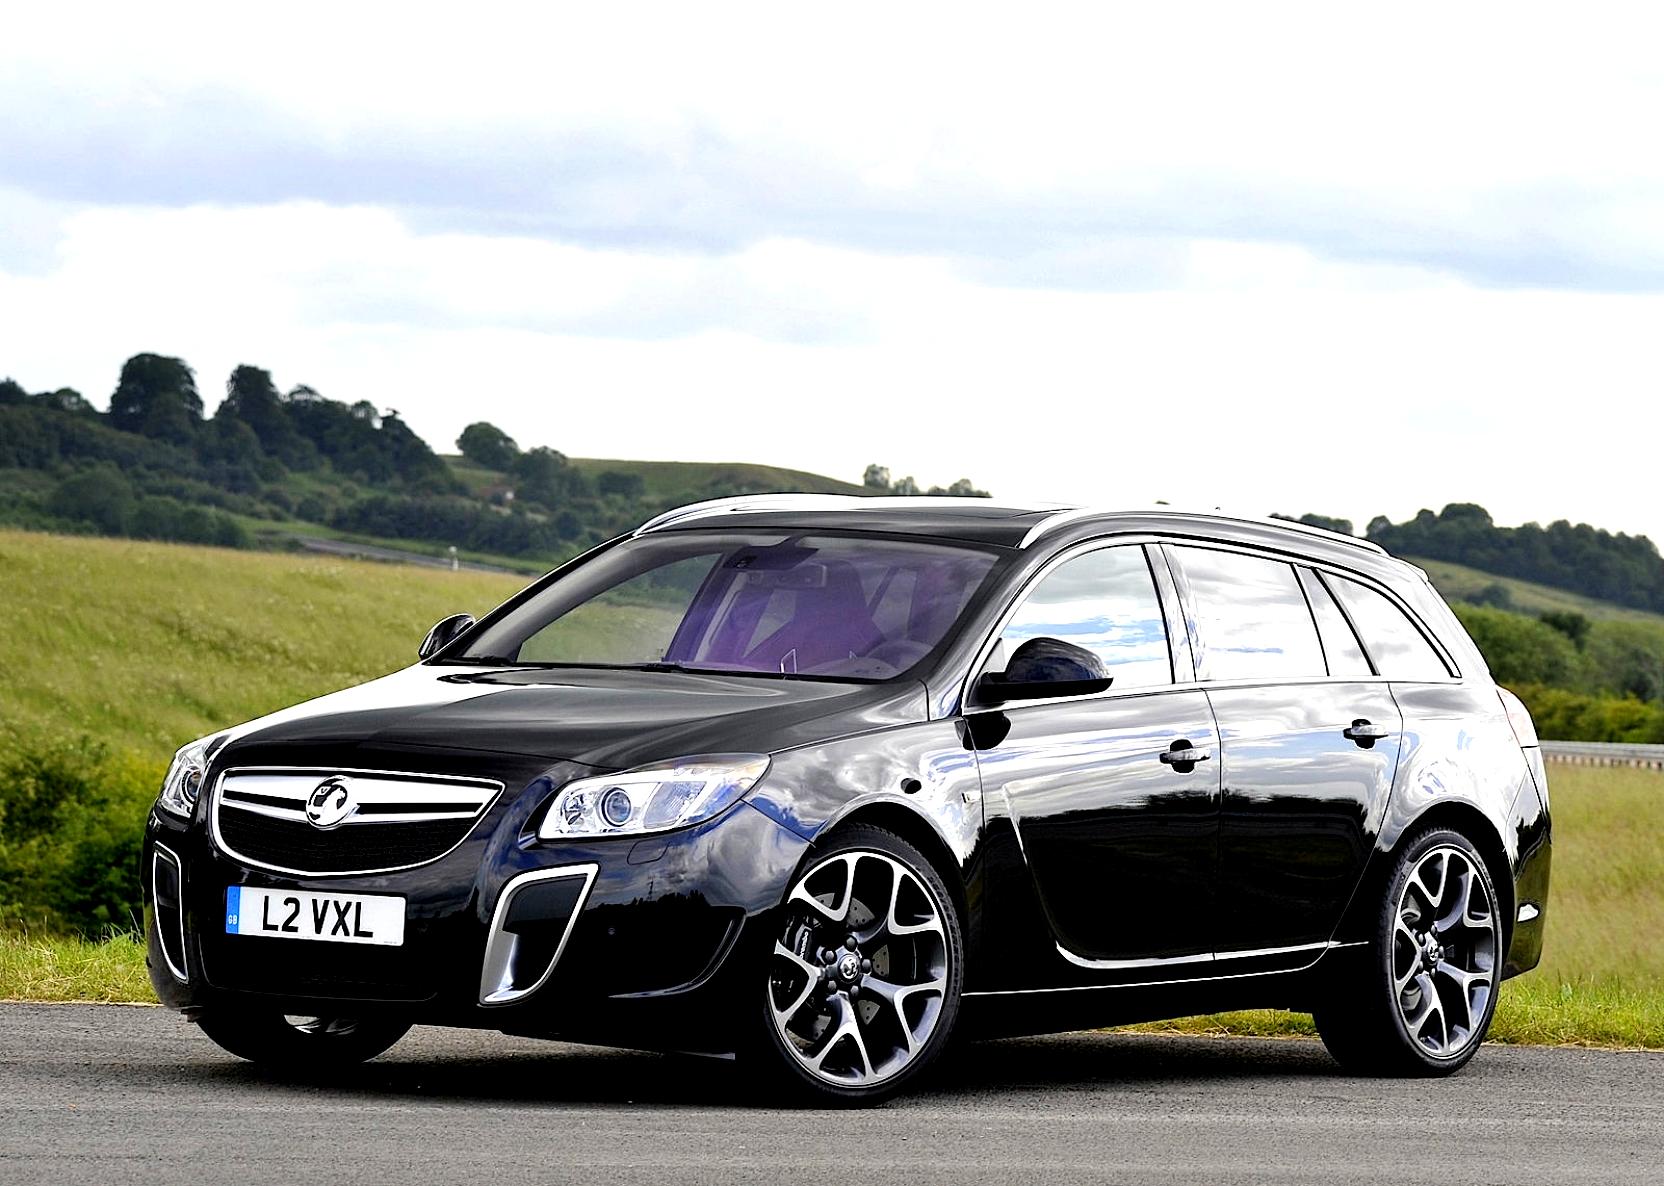 Vauxhall Insignia VXR Supersport Touring Sports 2010 #7